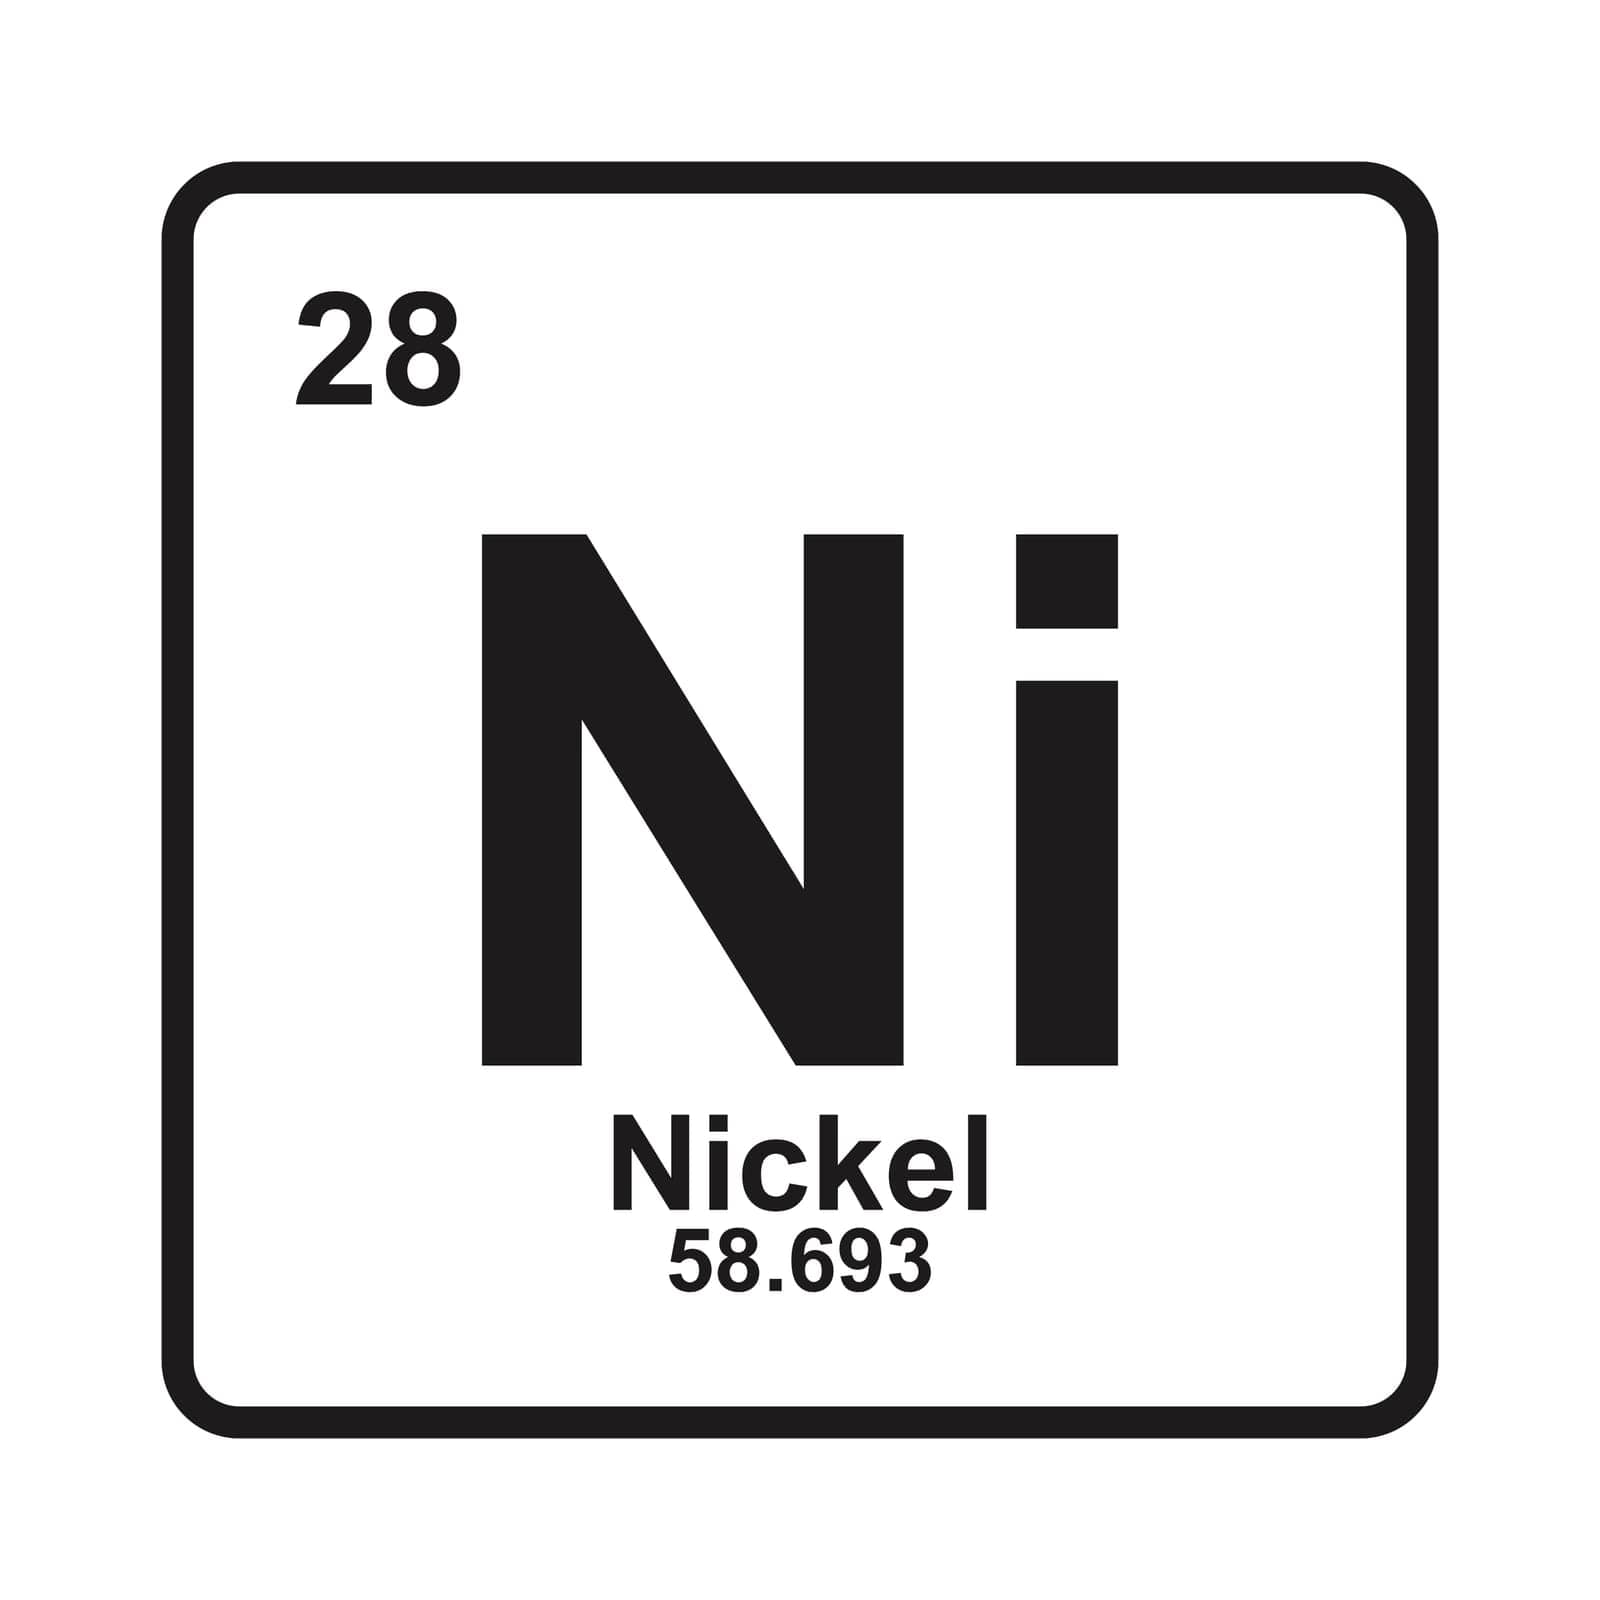 Nickel icon, chemical element in the periodic table.